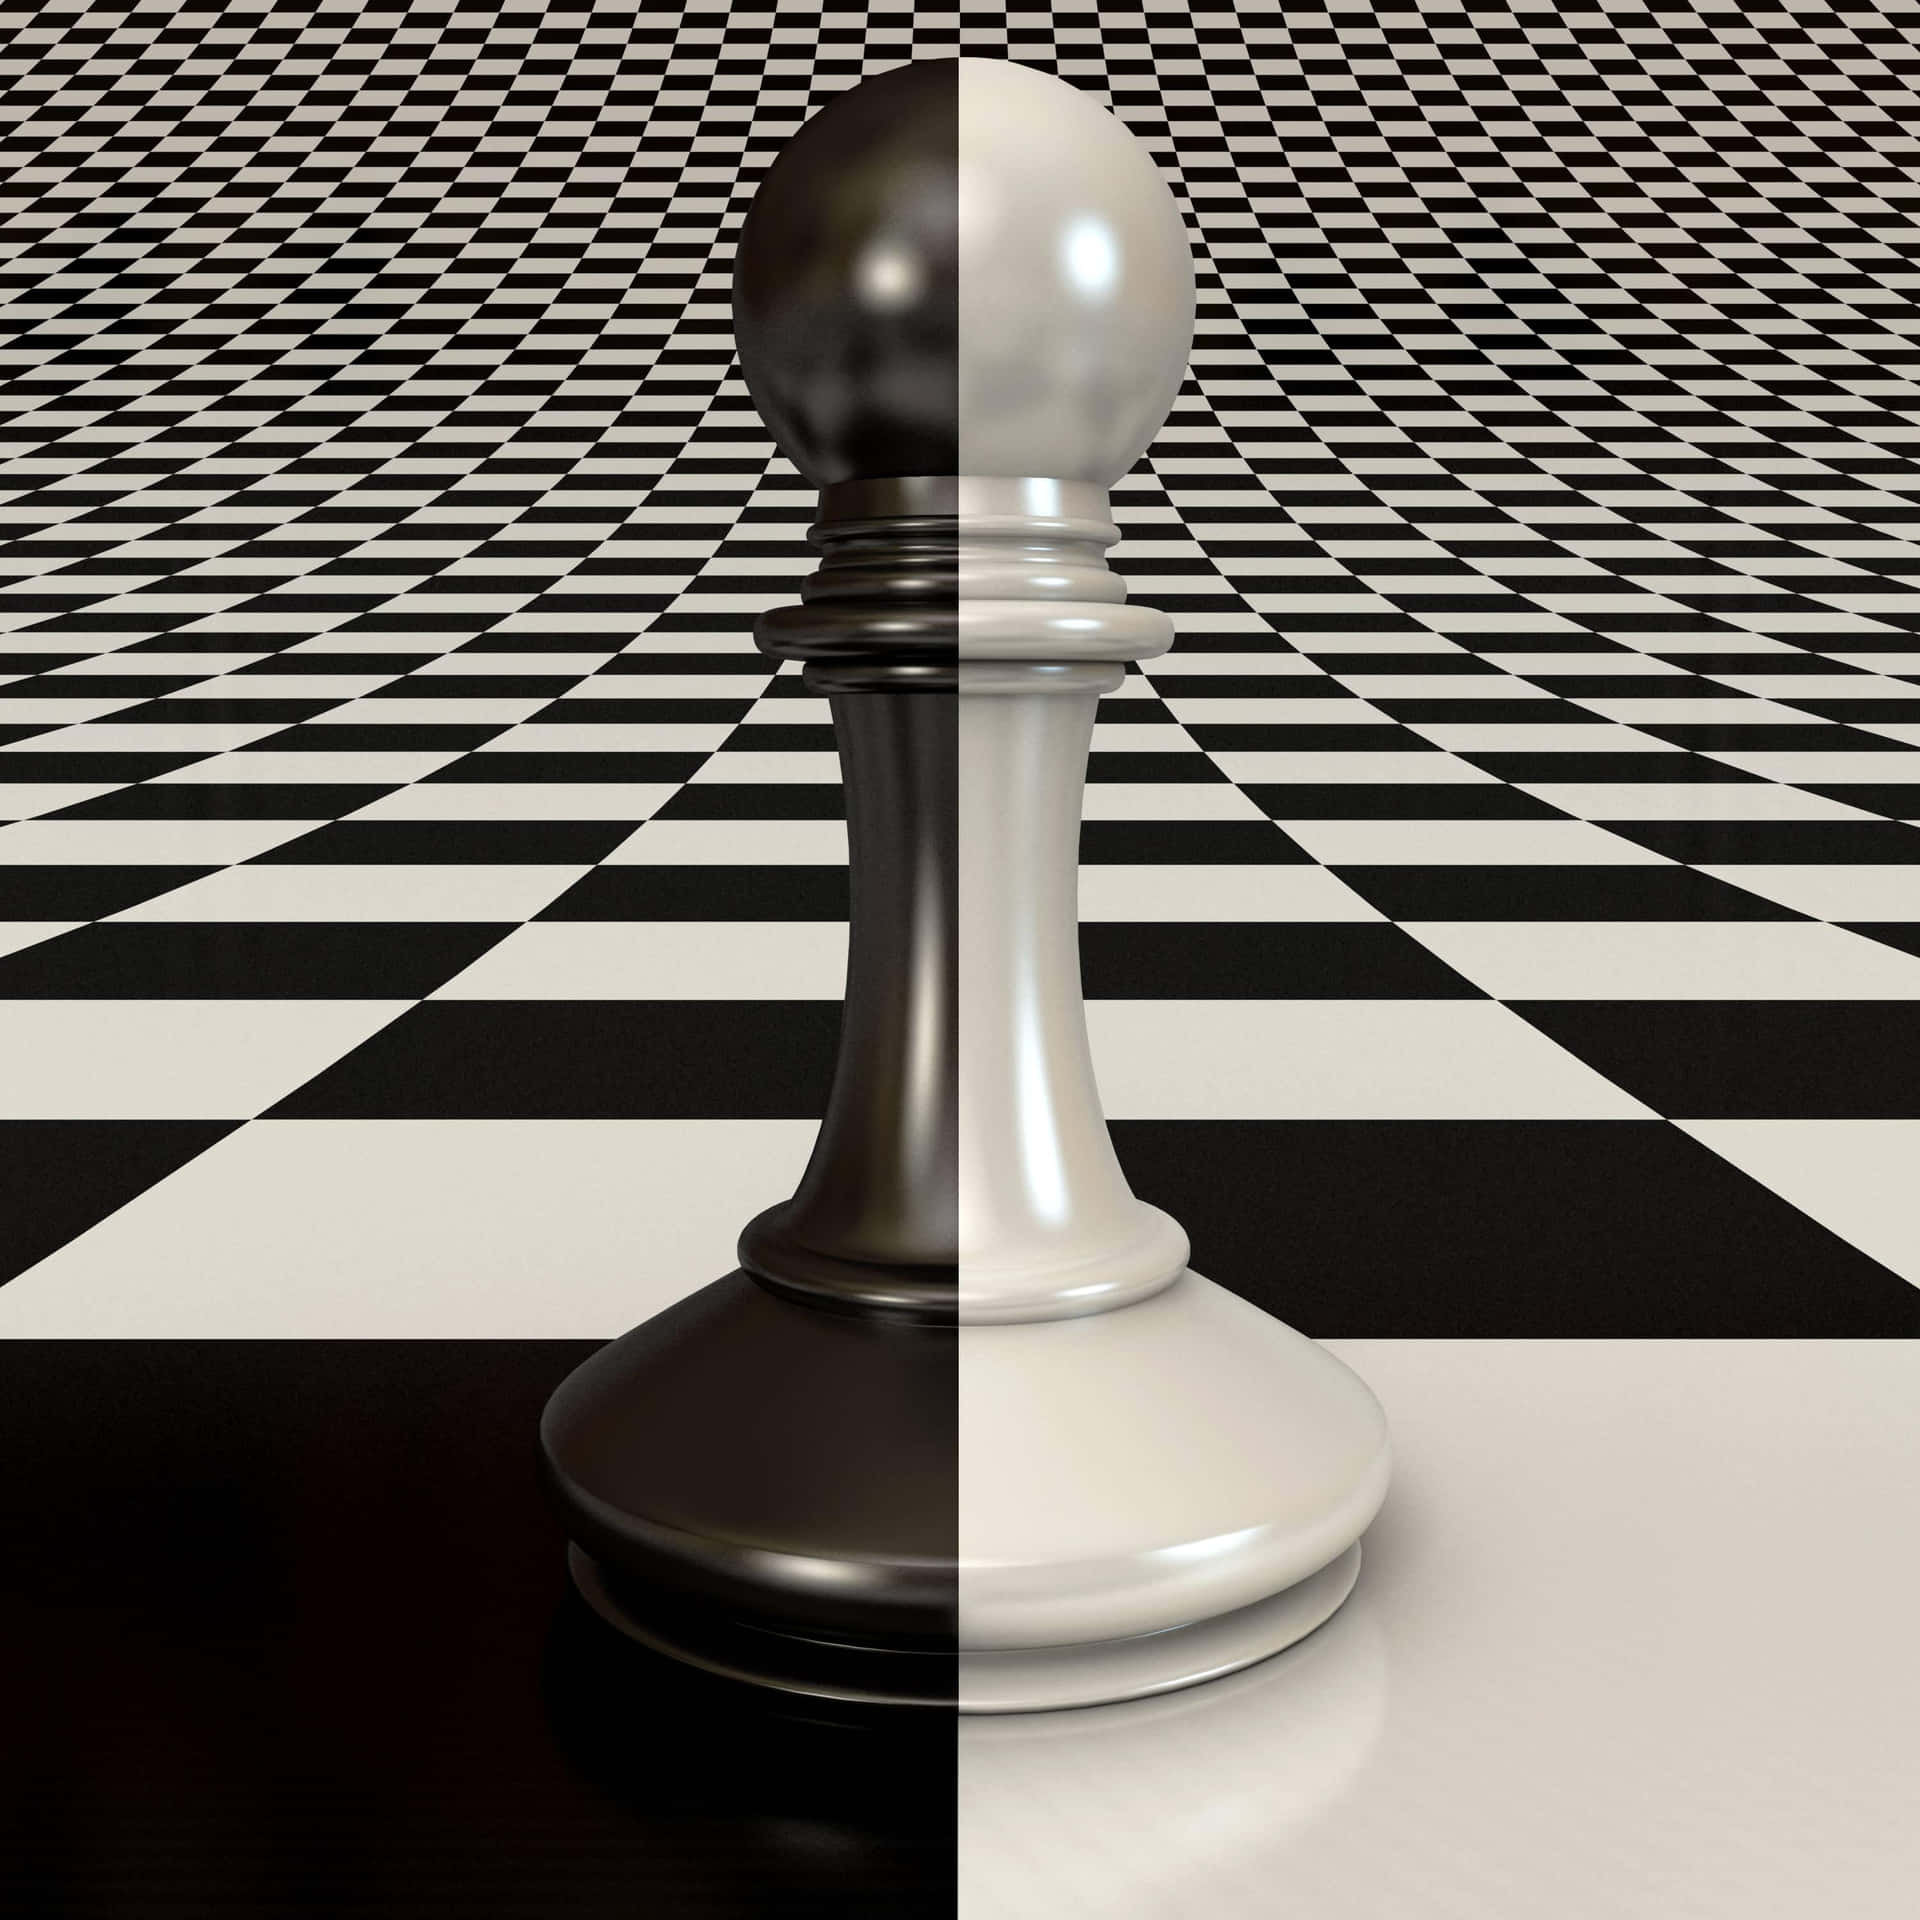 A Chess Piece On A Checkered Board